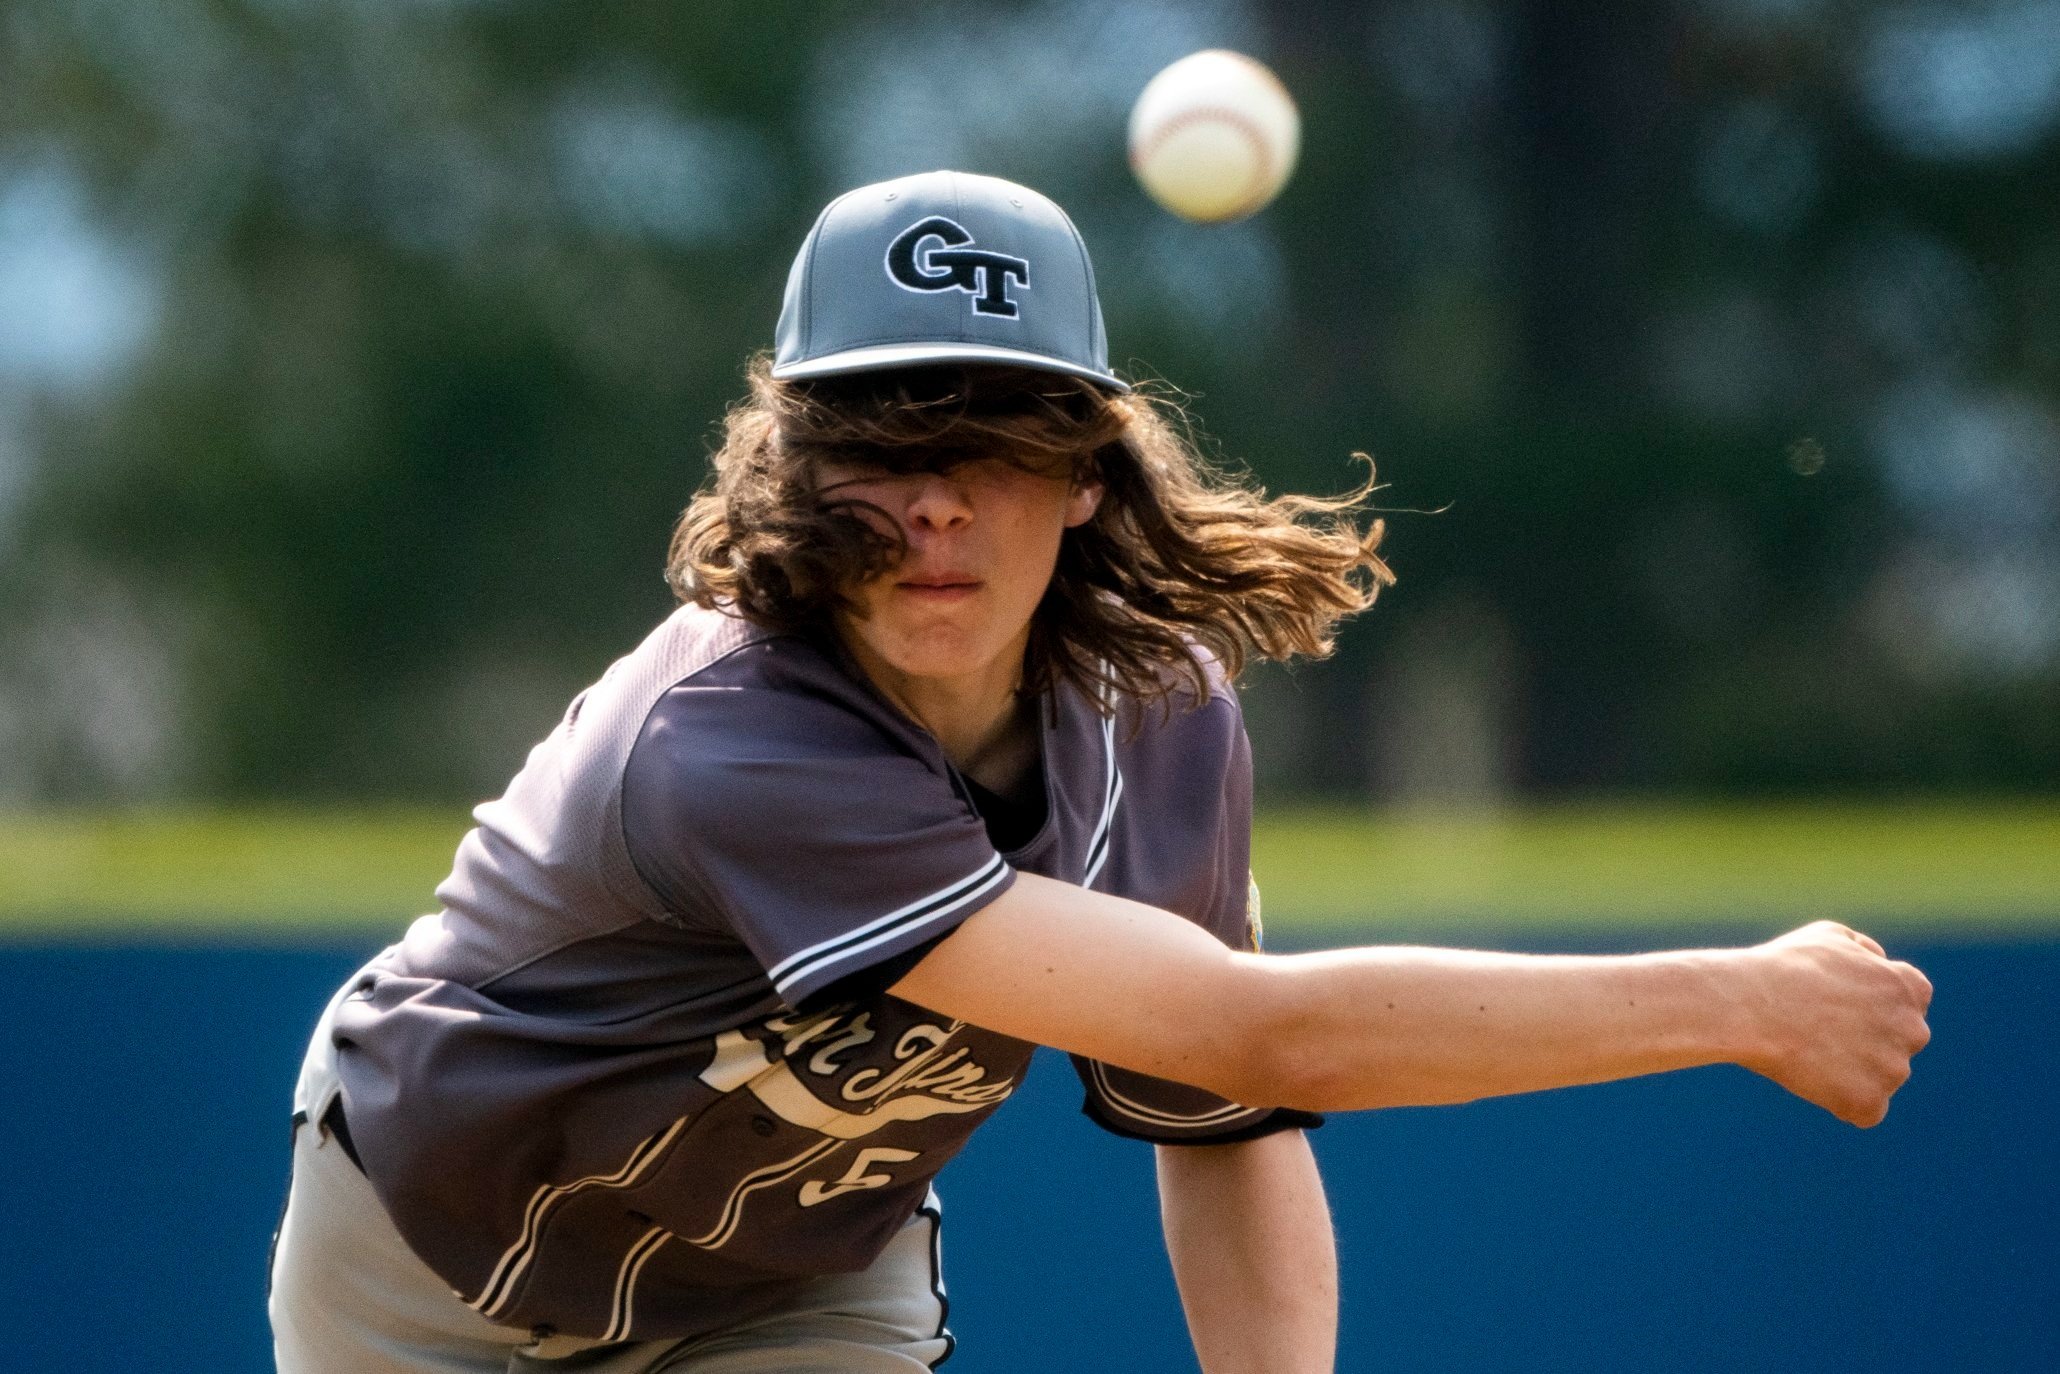  Glacier’s George Robbins (5) delivers from the mound during their baseball game at Lindborg-Cregg Field, Sunday, April 18, 2021 in Missoula. 